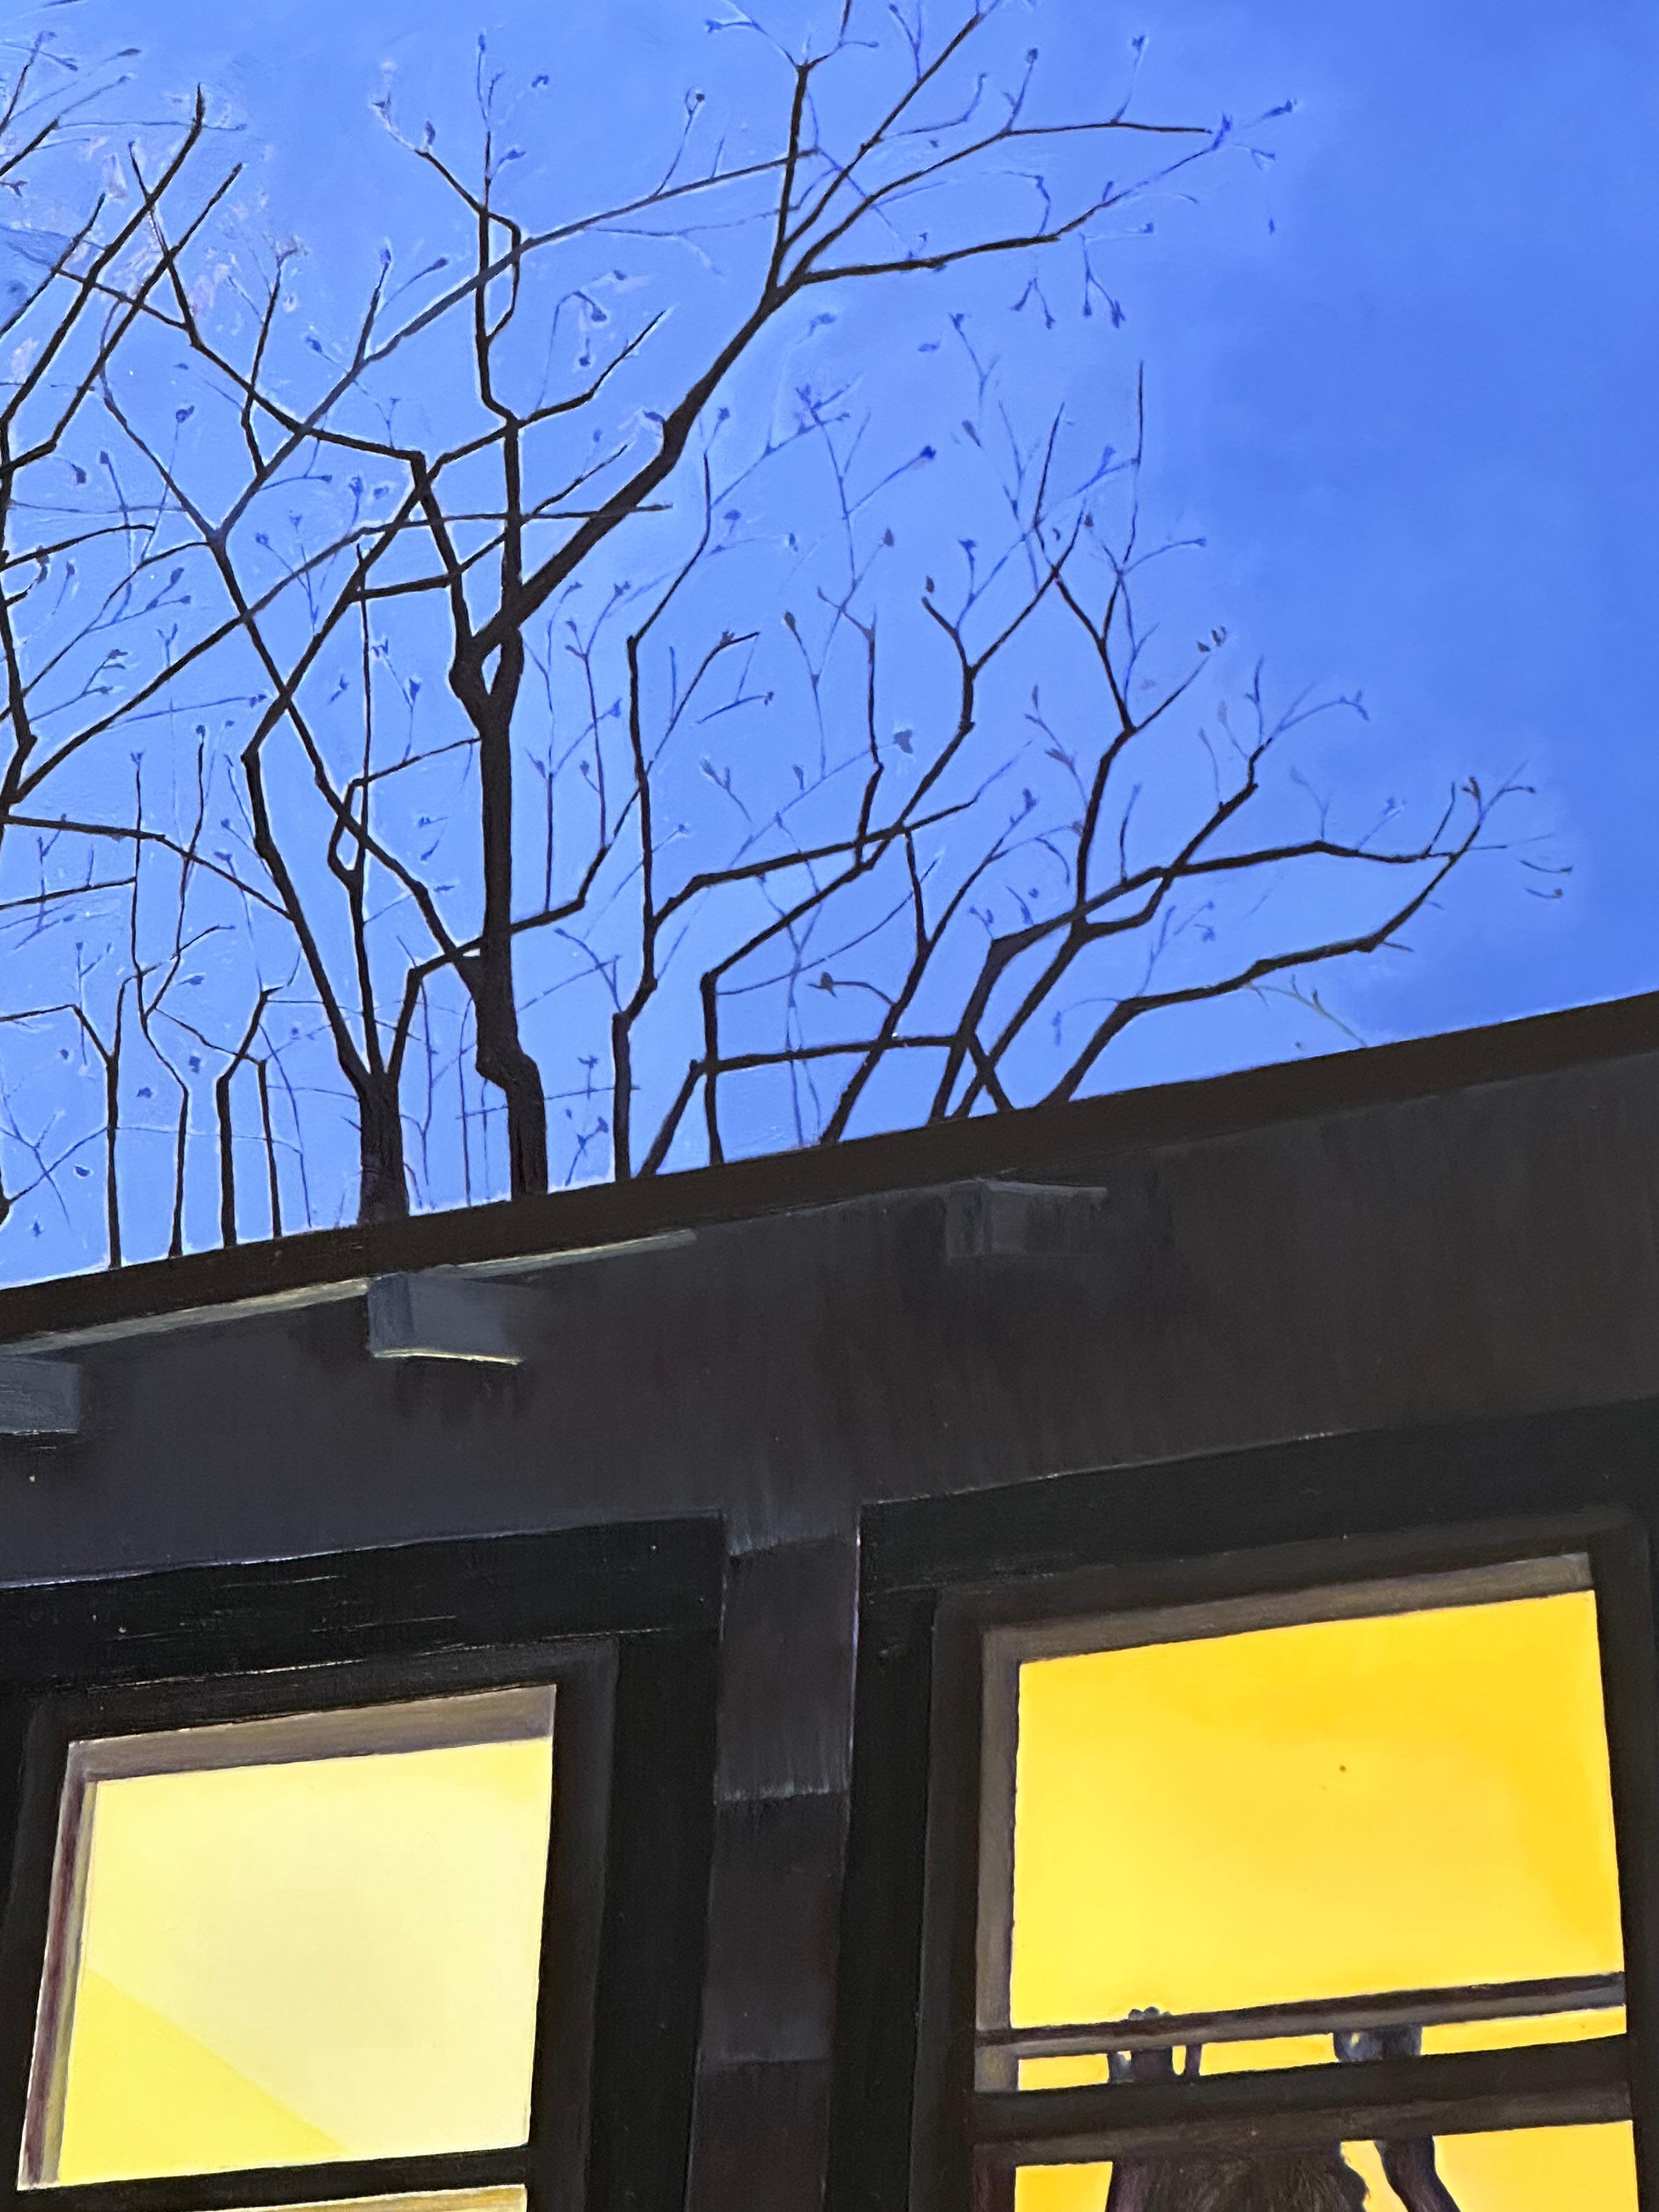 Spring Chill, Female Figure in Window, House at Night, Blue, Black Tree Branches 2